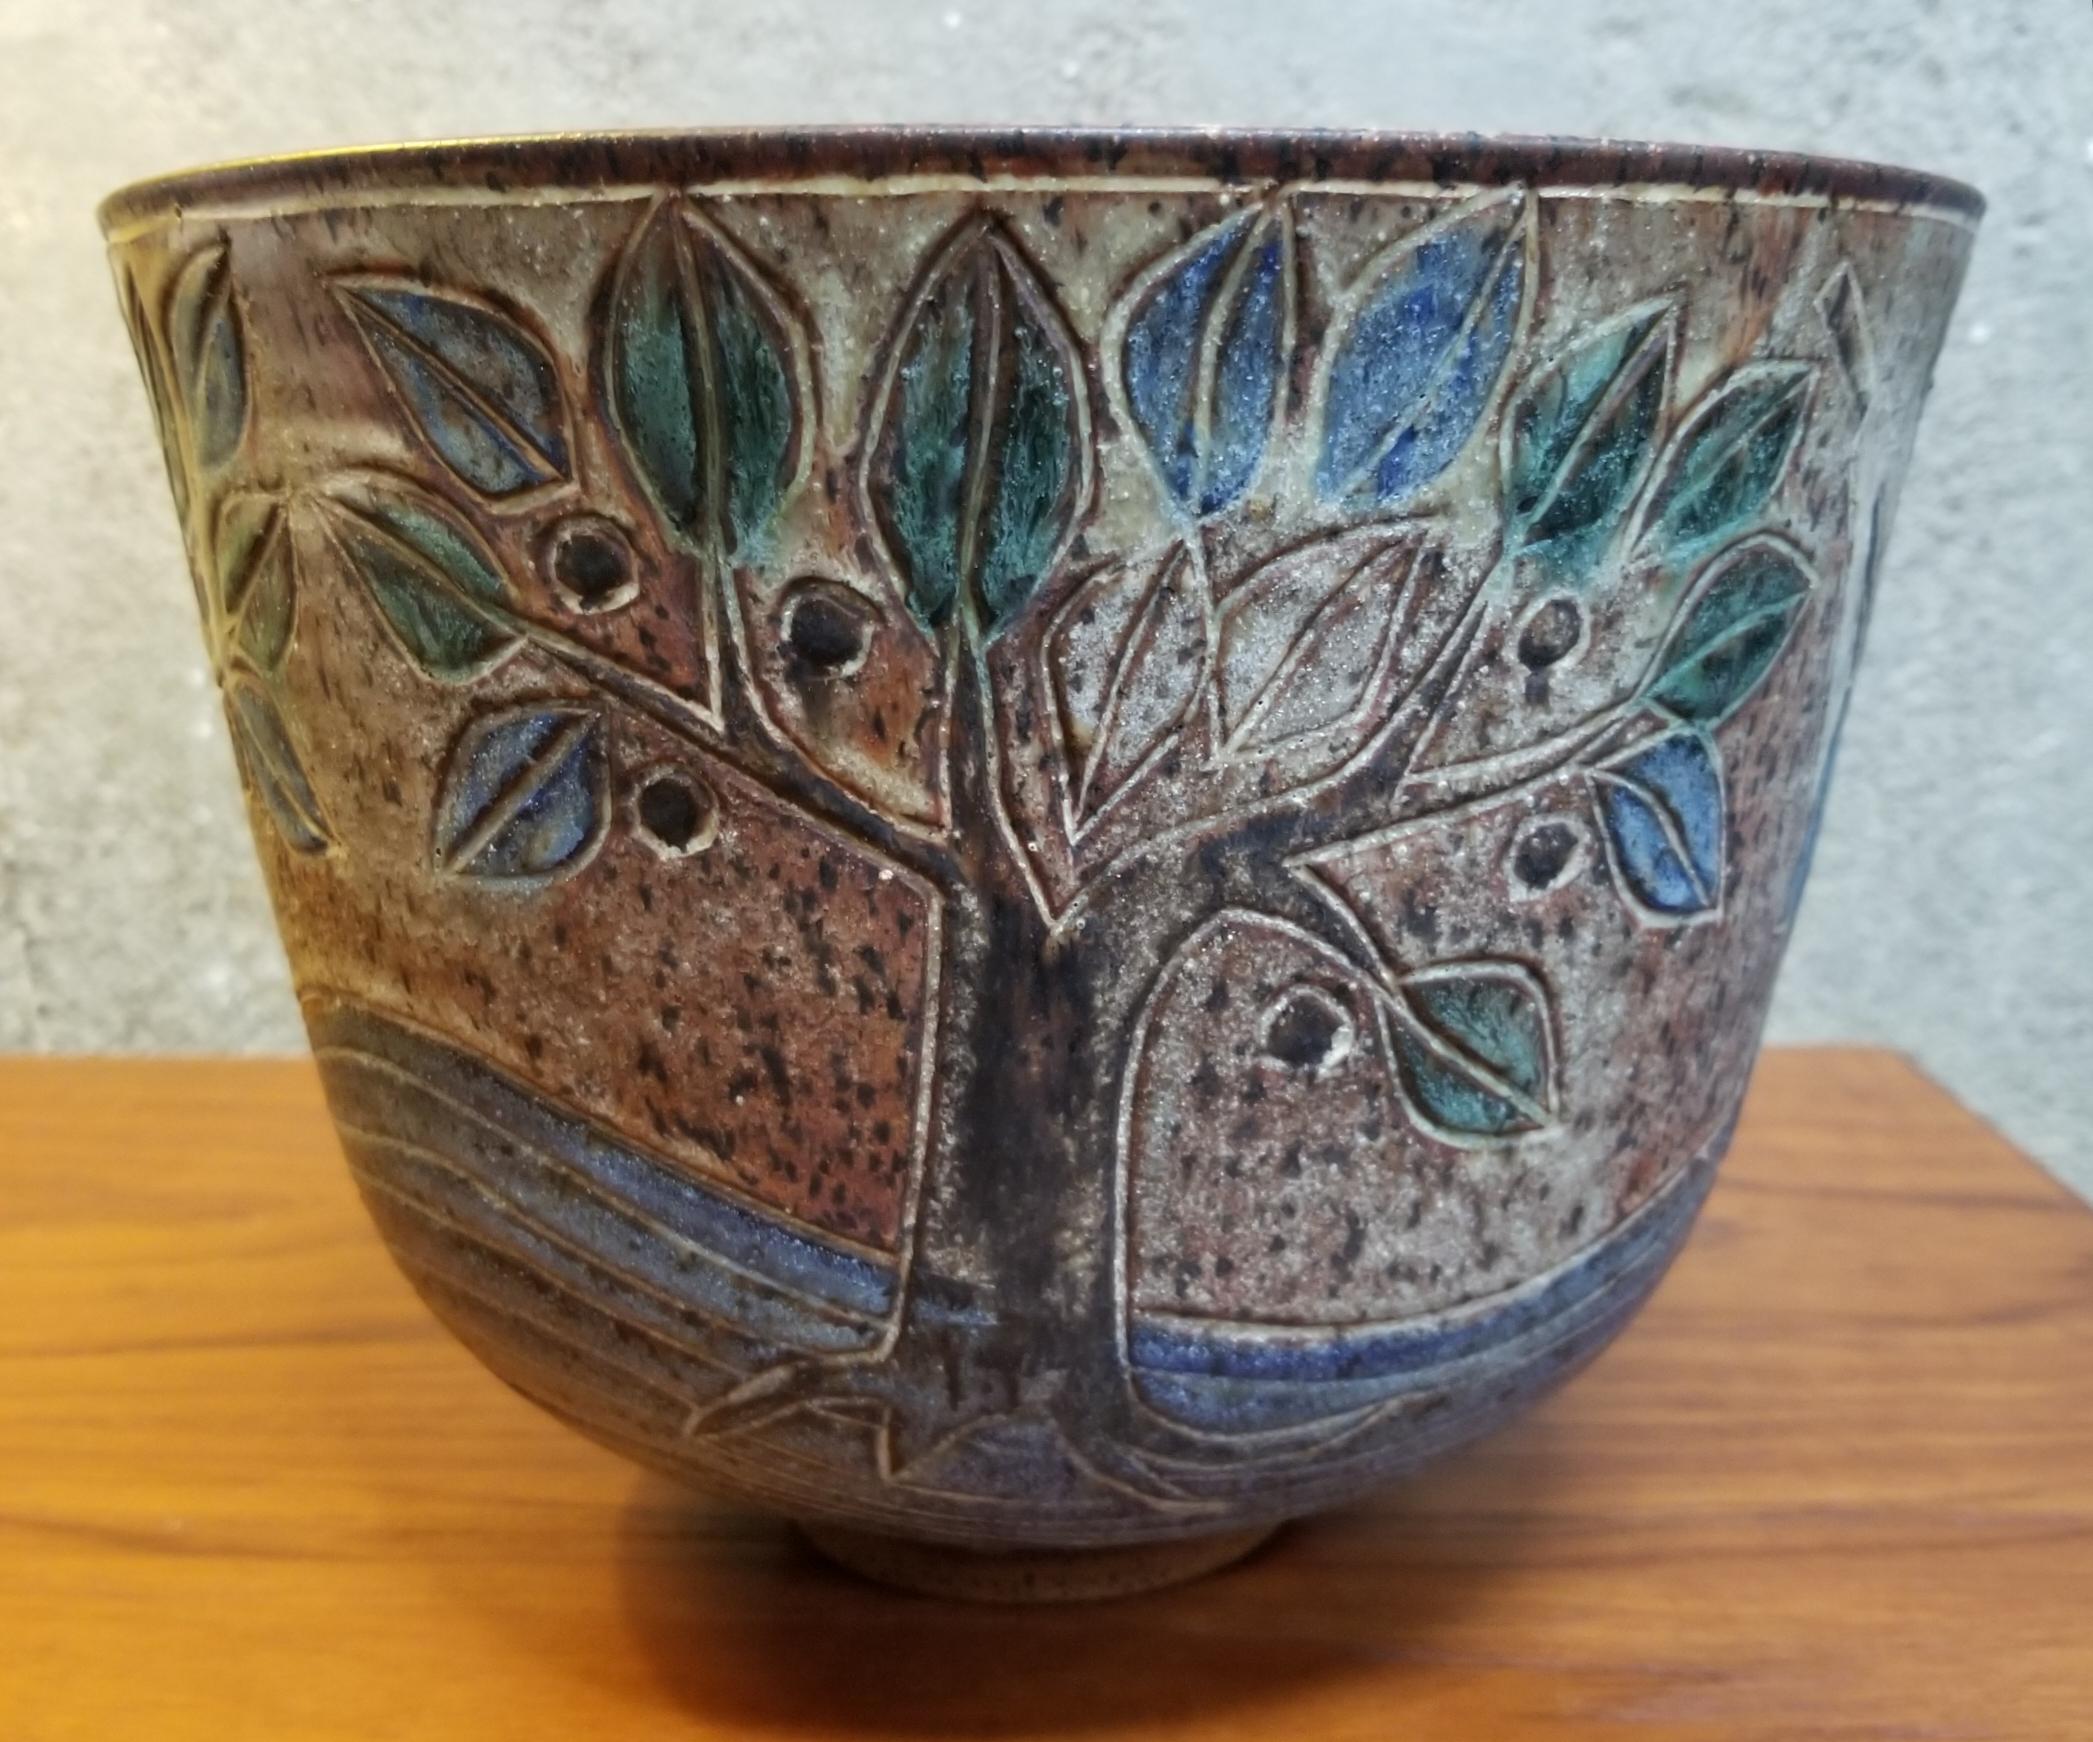 Beautiful glaze colors in this prolific California potter incised bowl. Hand turned and decorated with a figure, dragon and trees. Depicting Saint George and the Dragon. Circa late 1960's. Matt glaze on exterior, high-tone mottled glaze on interior.